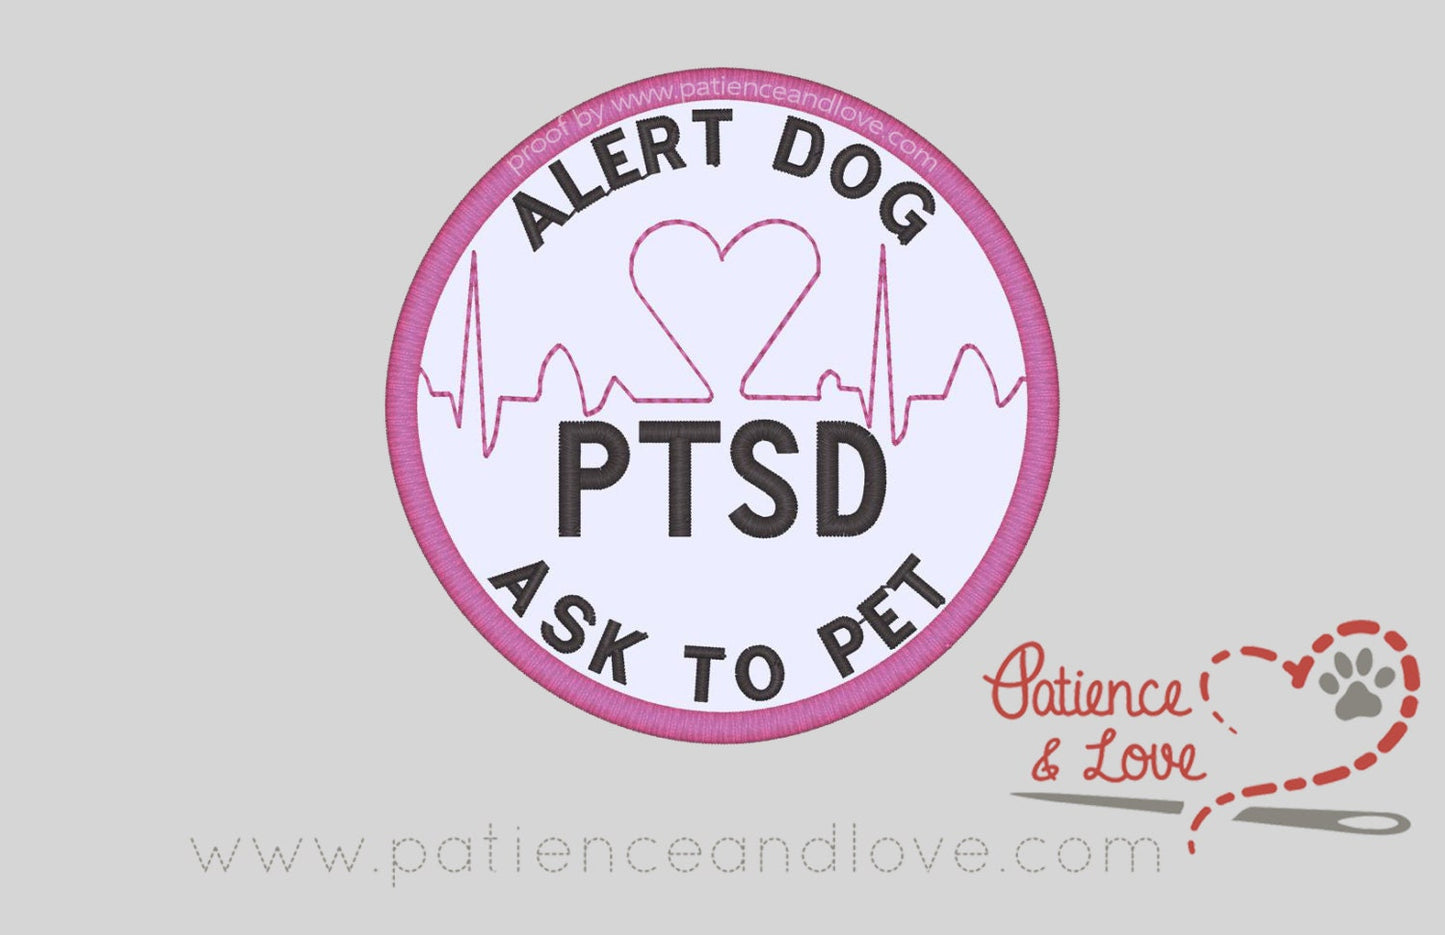 Alert Dog - PTSD - Ask to Pet, with ekg heartbeat, 3-inch round patch